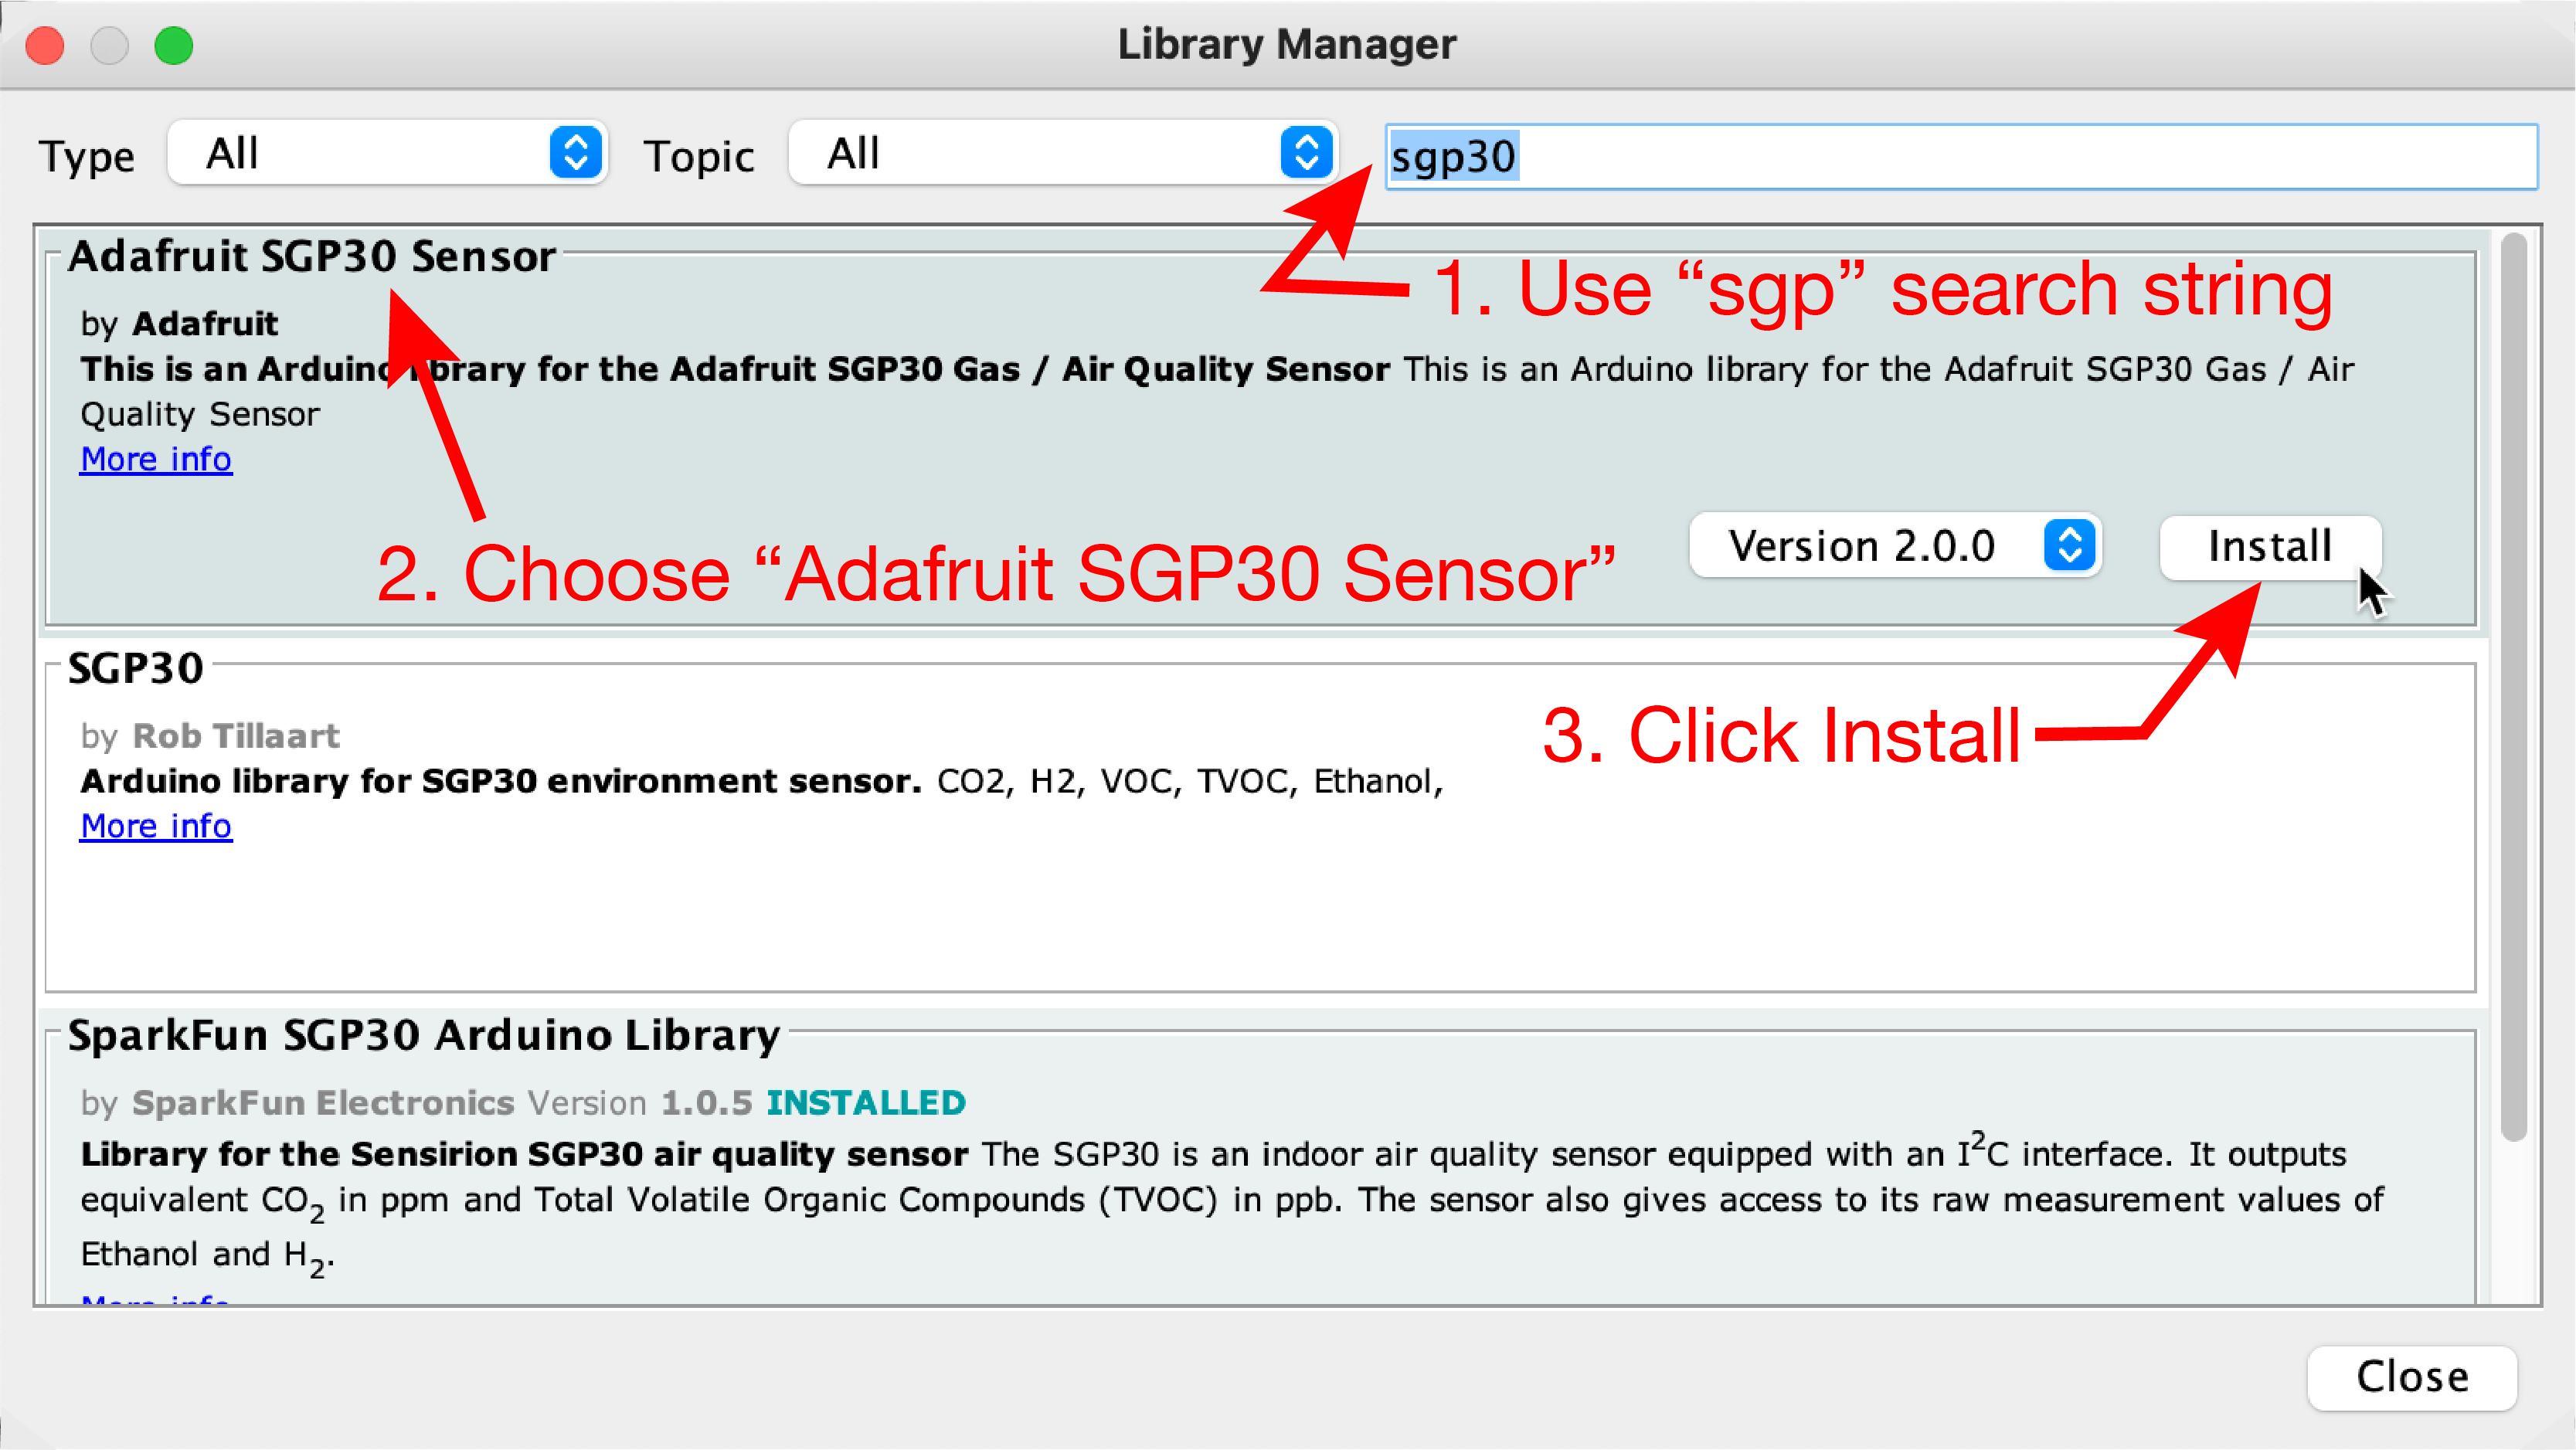 Select and install the Adafruit SGP30 Sensor library